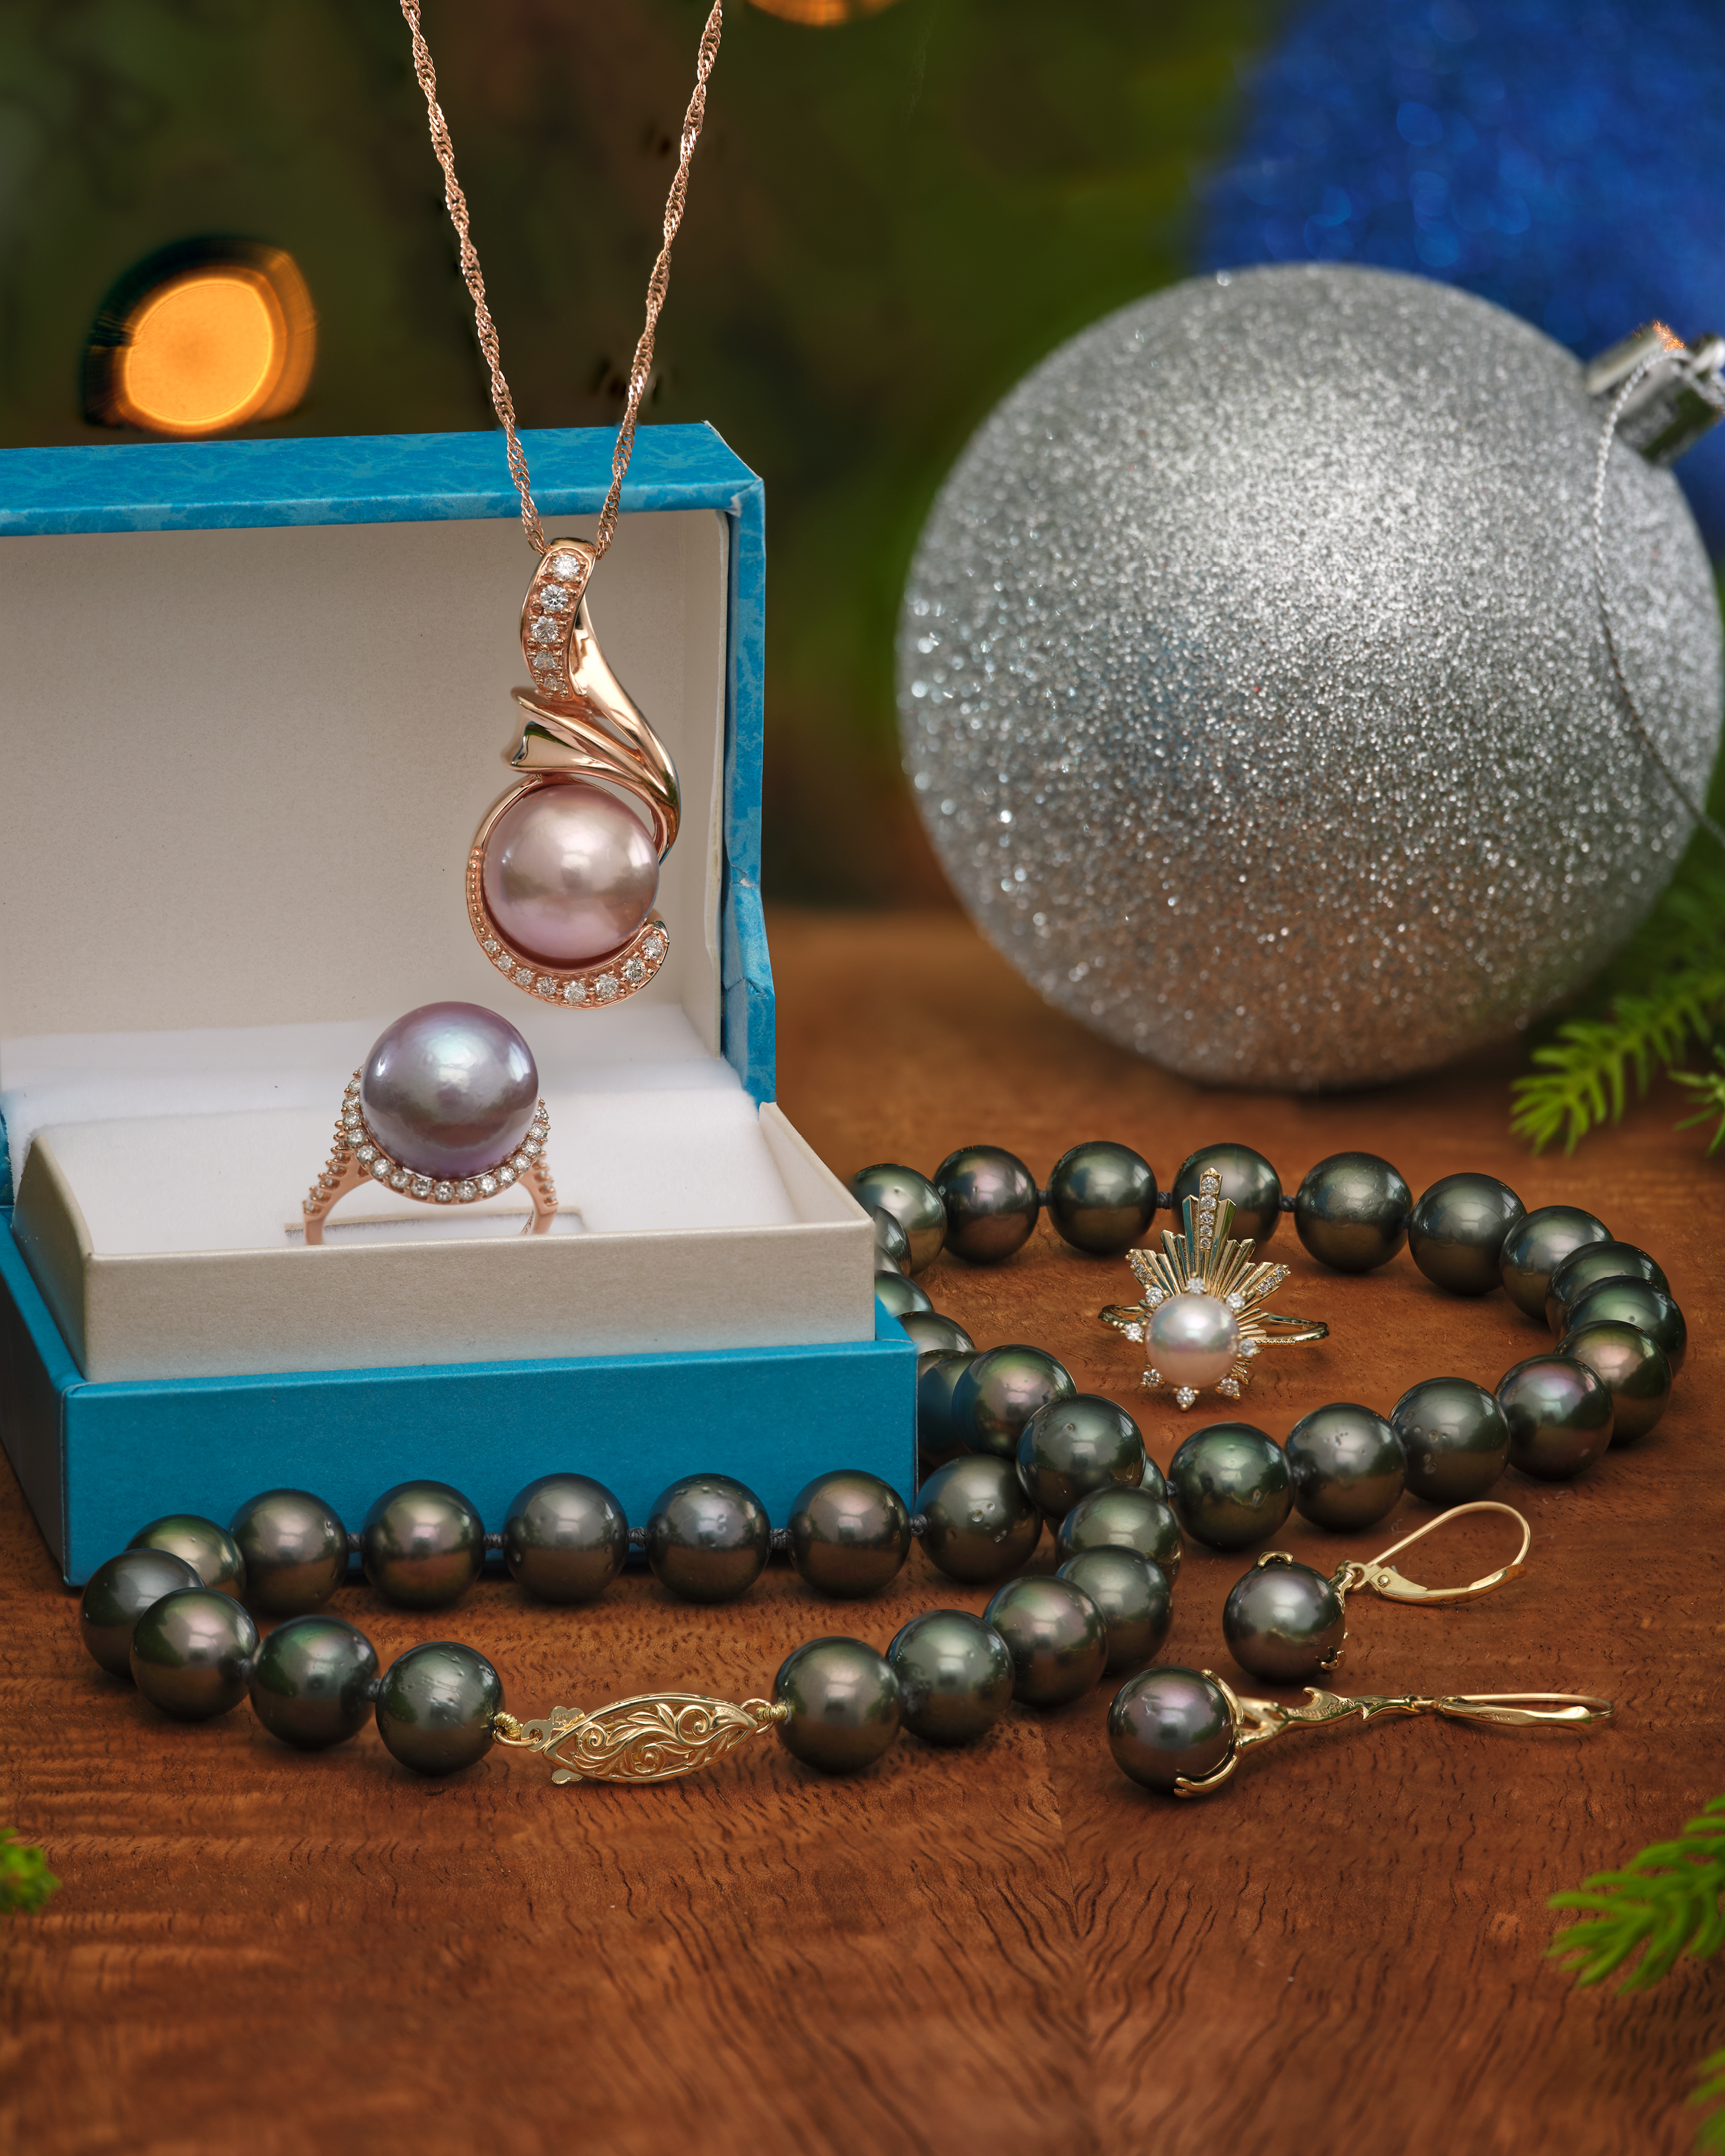 2022 Holiday Campaign from Maui Divers Jewelry